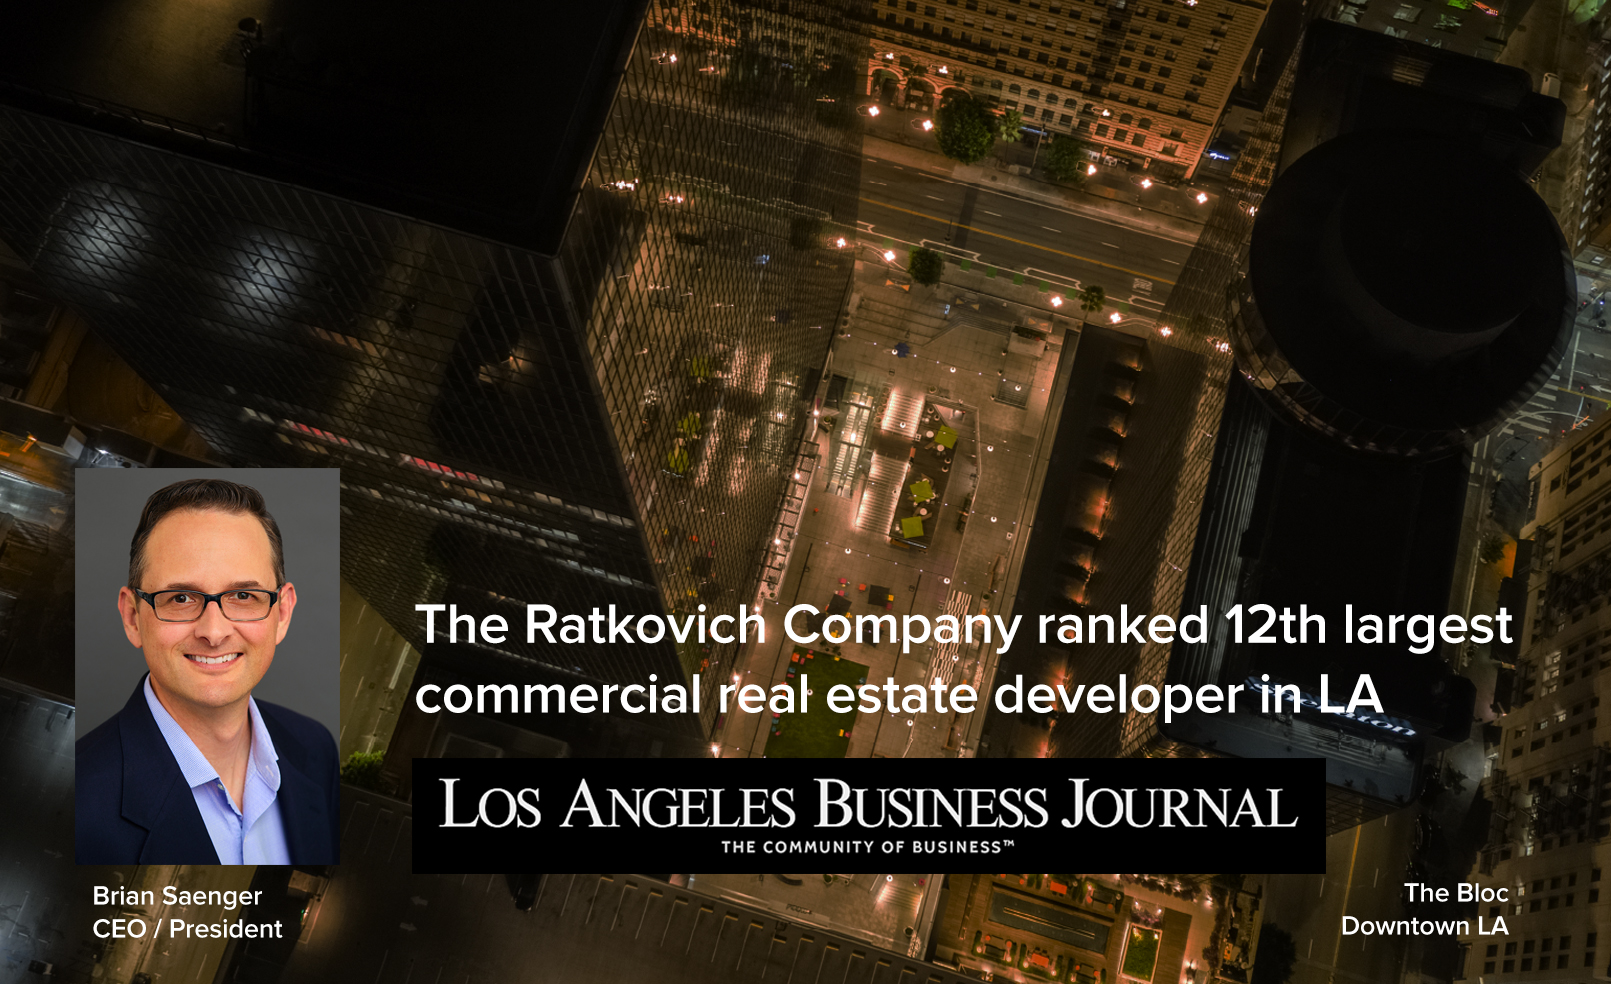 The Ratkovich Company ranked 12th largest commercial real estate developer…